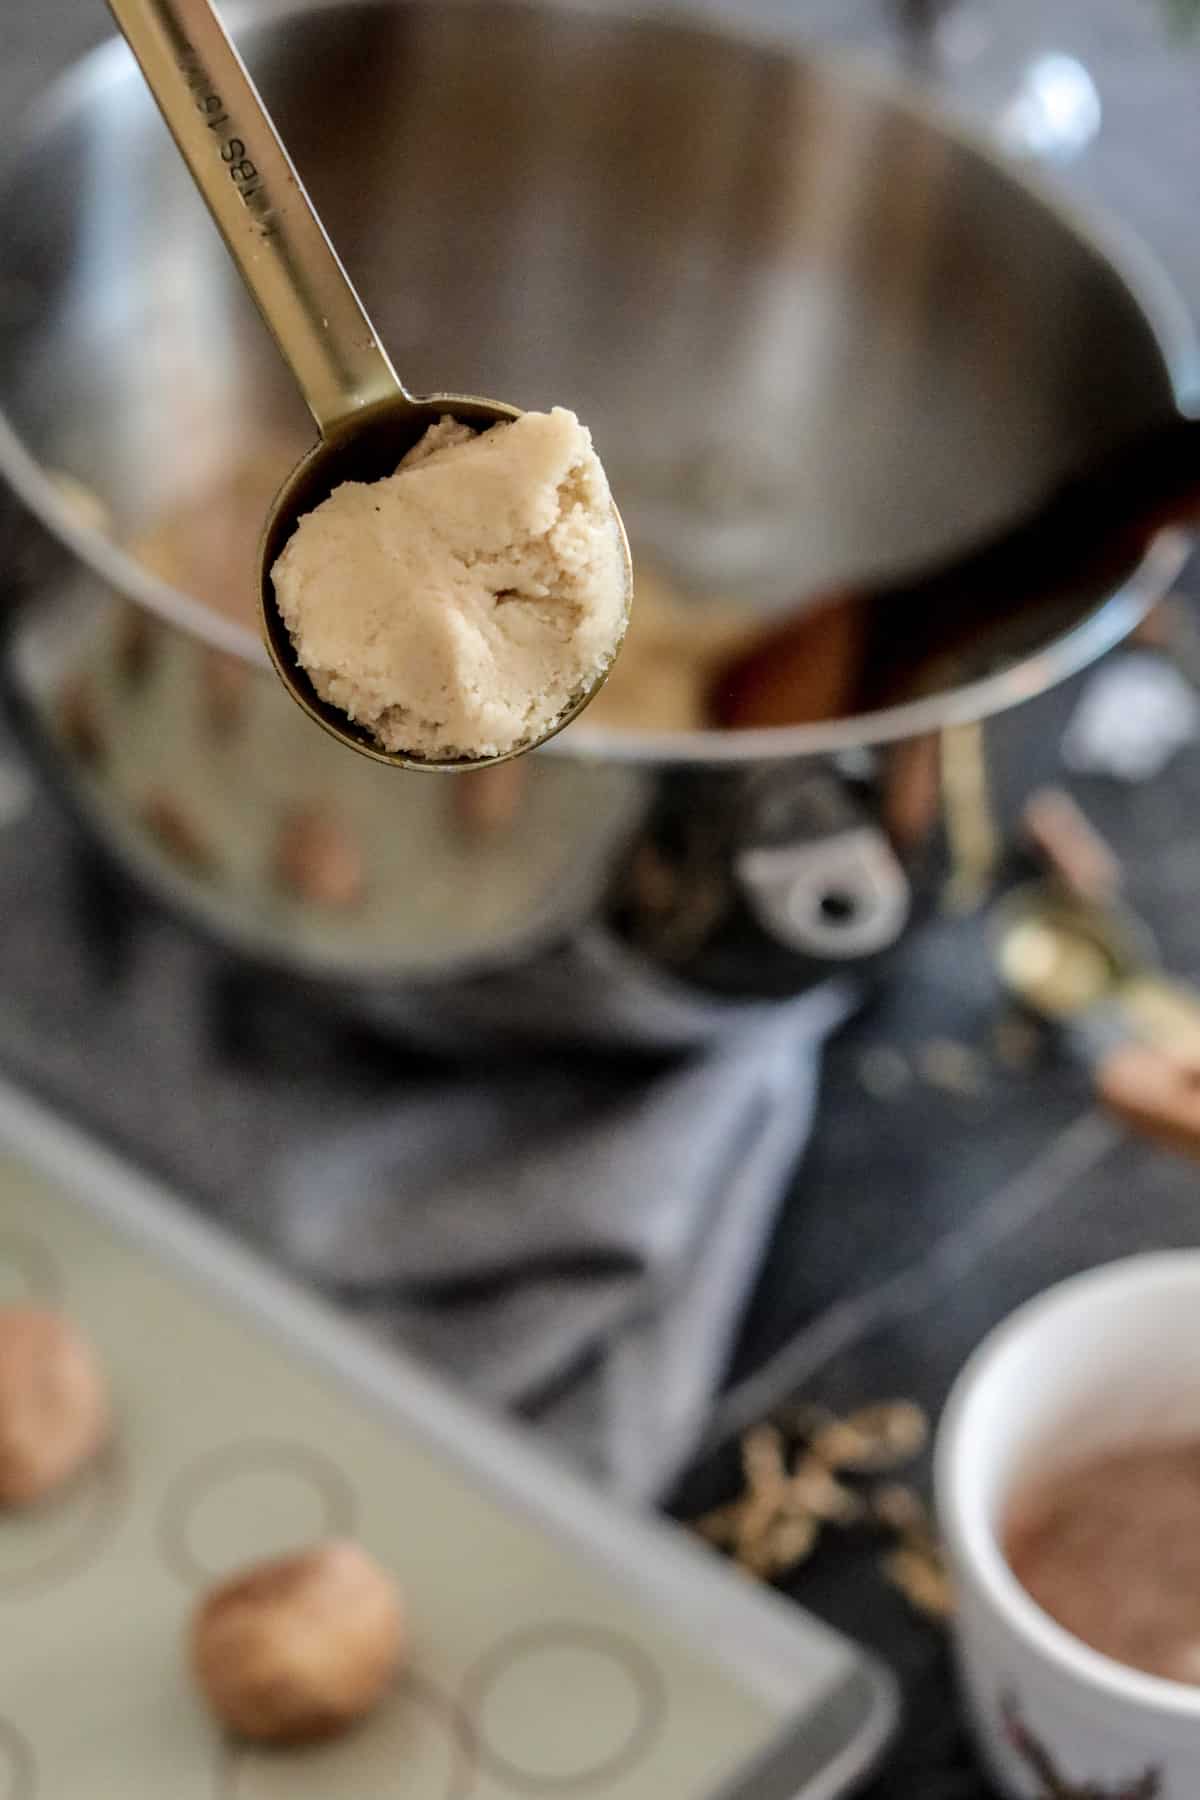 Cookie dough in a measuring spoon.